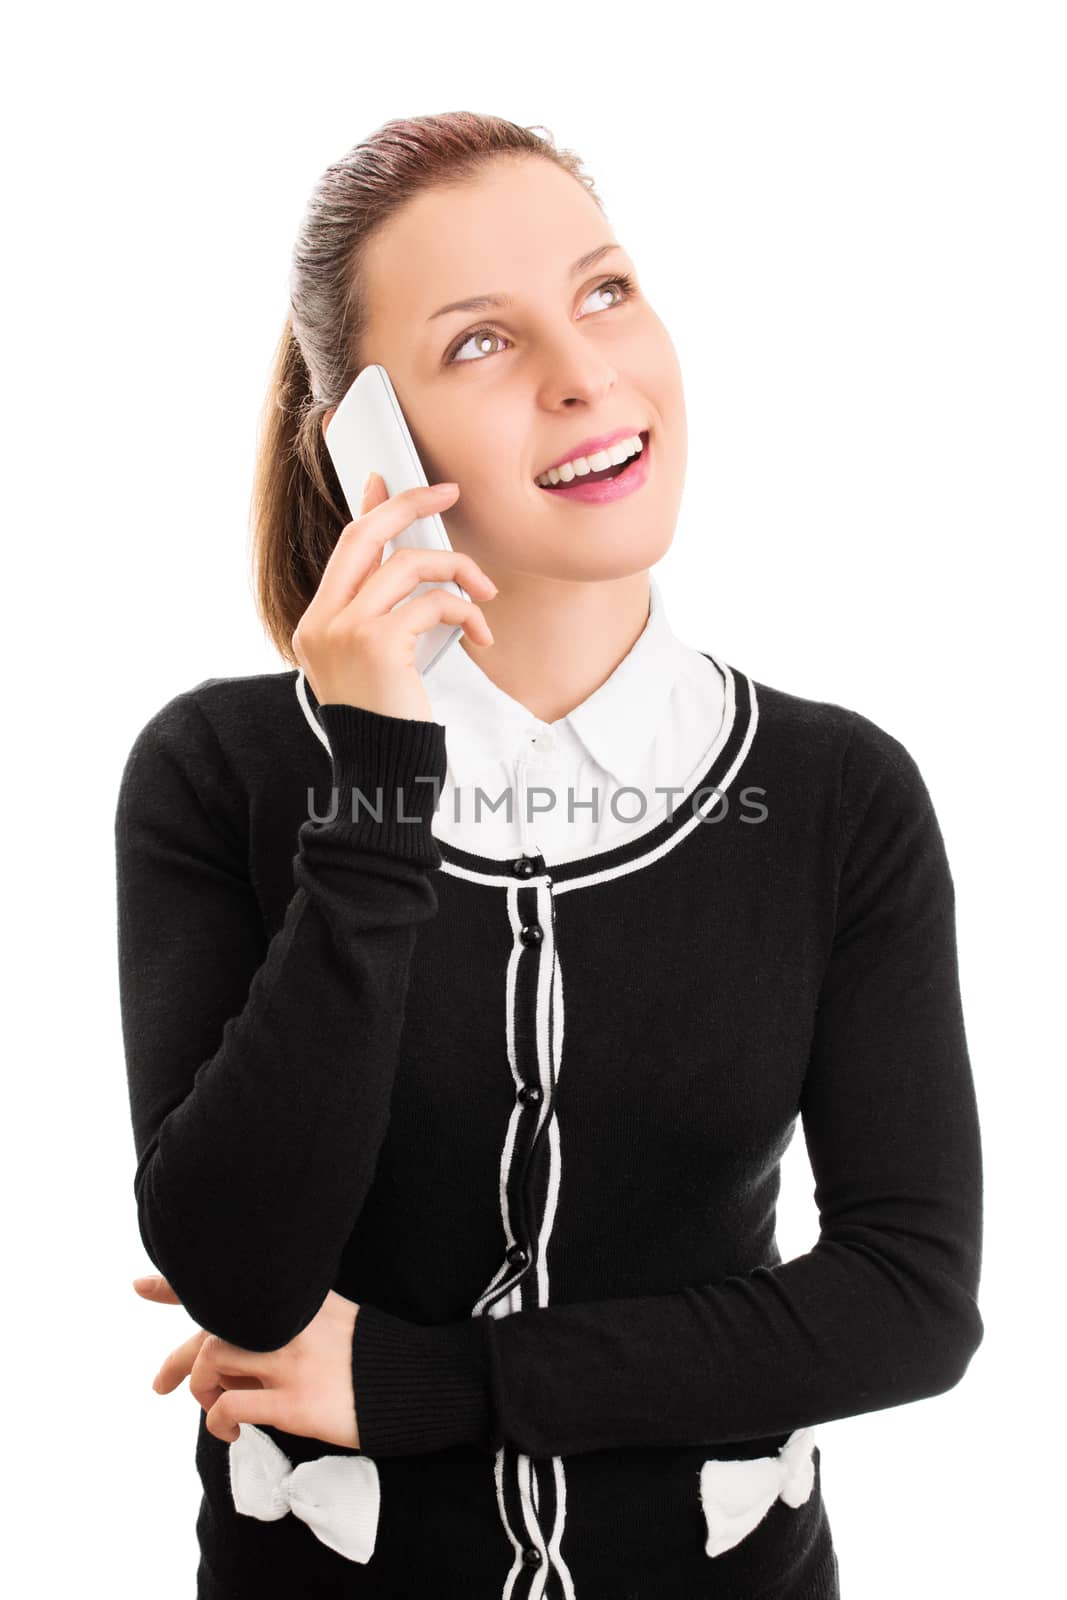 Smiling young girl talking on a phone by Mendelex